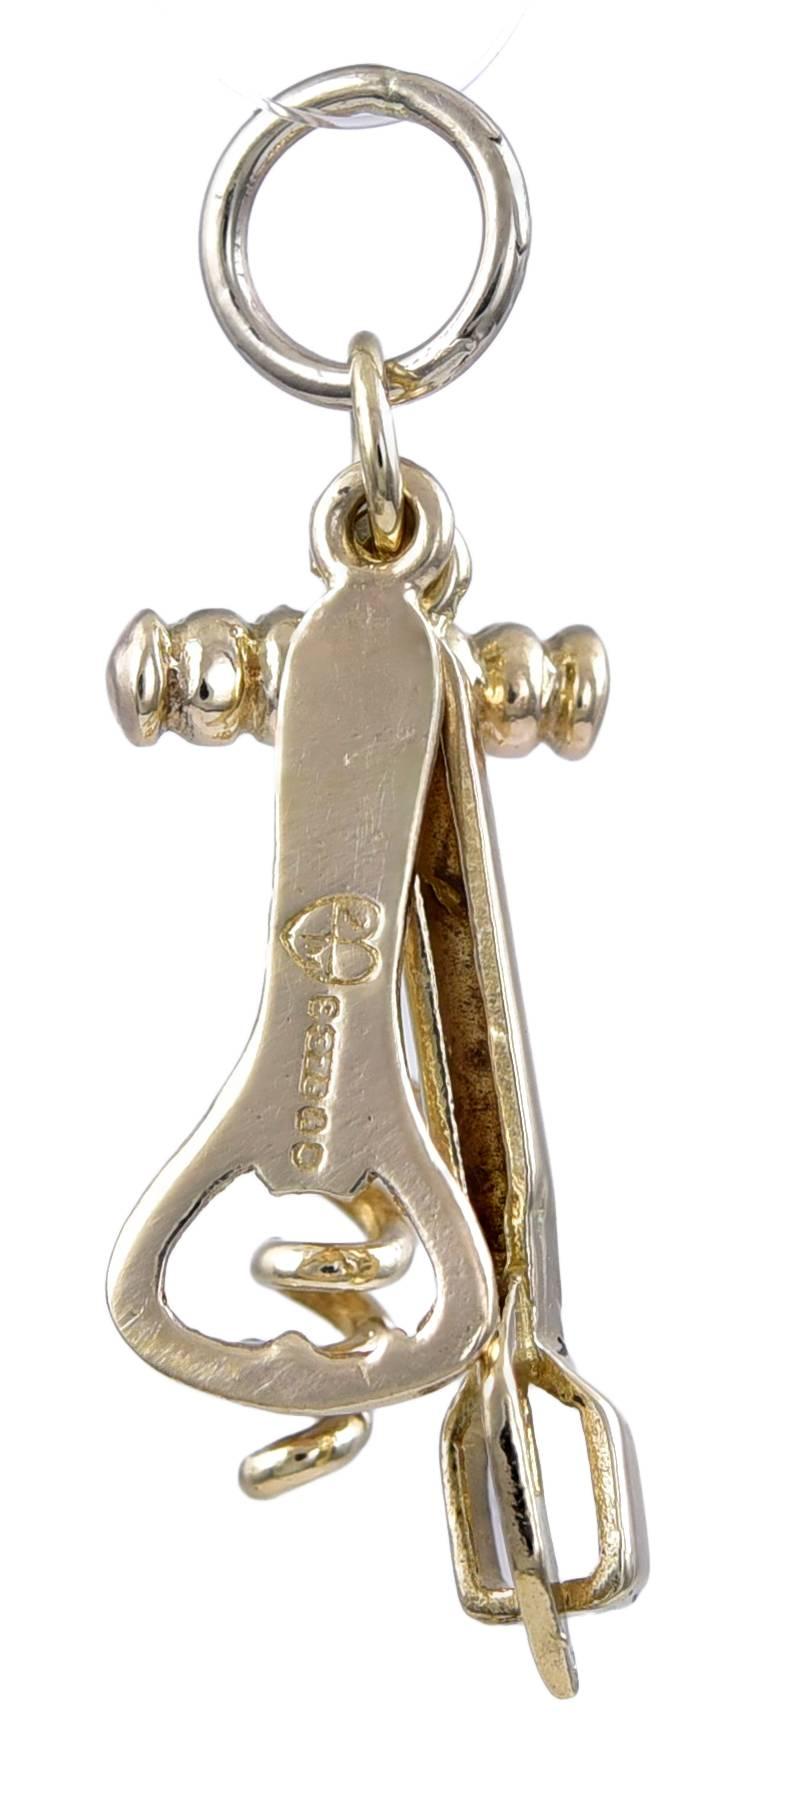 Unique charm:  figural corkscrew, ice tongs and bottle opener. 14K yellow gold. Cheers!

Alice Kwartler has sold the finest antique gold and diamond jewelry and silver for over forty years.